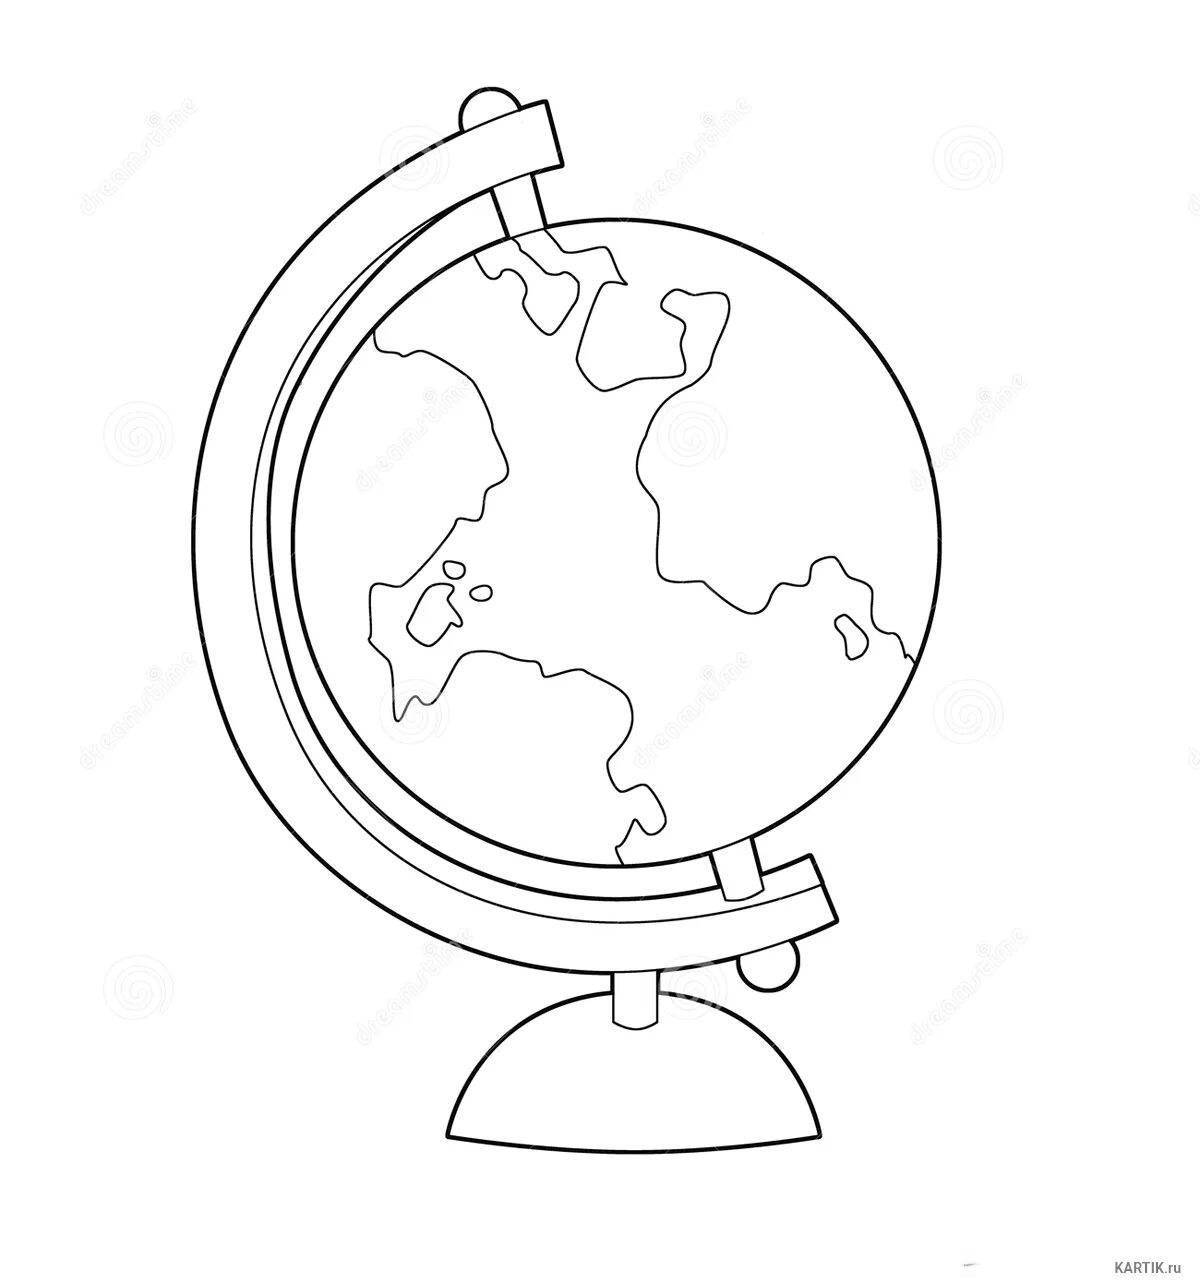 Creative globe coloring template for kids